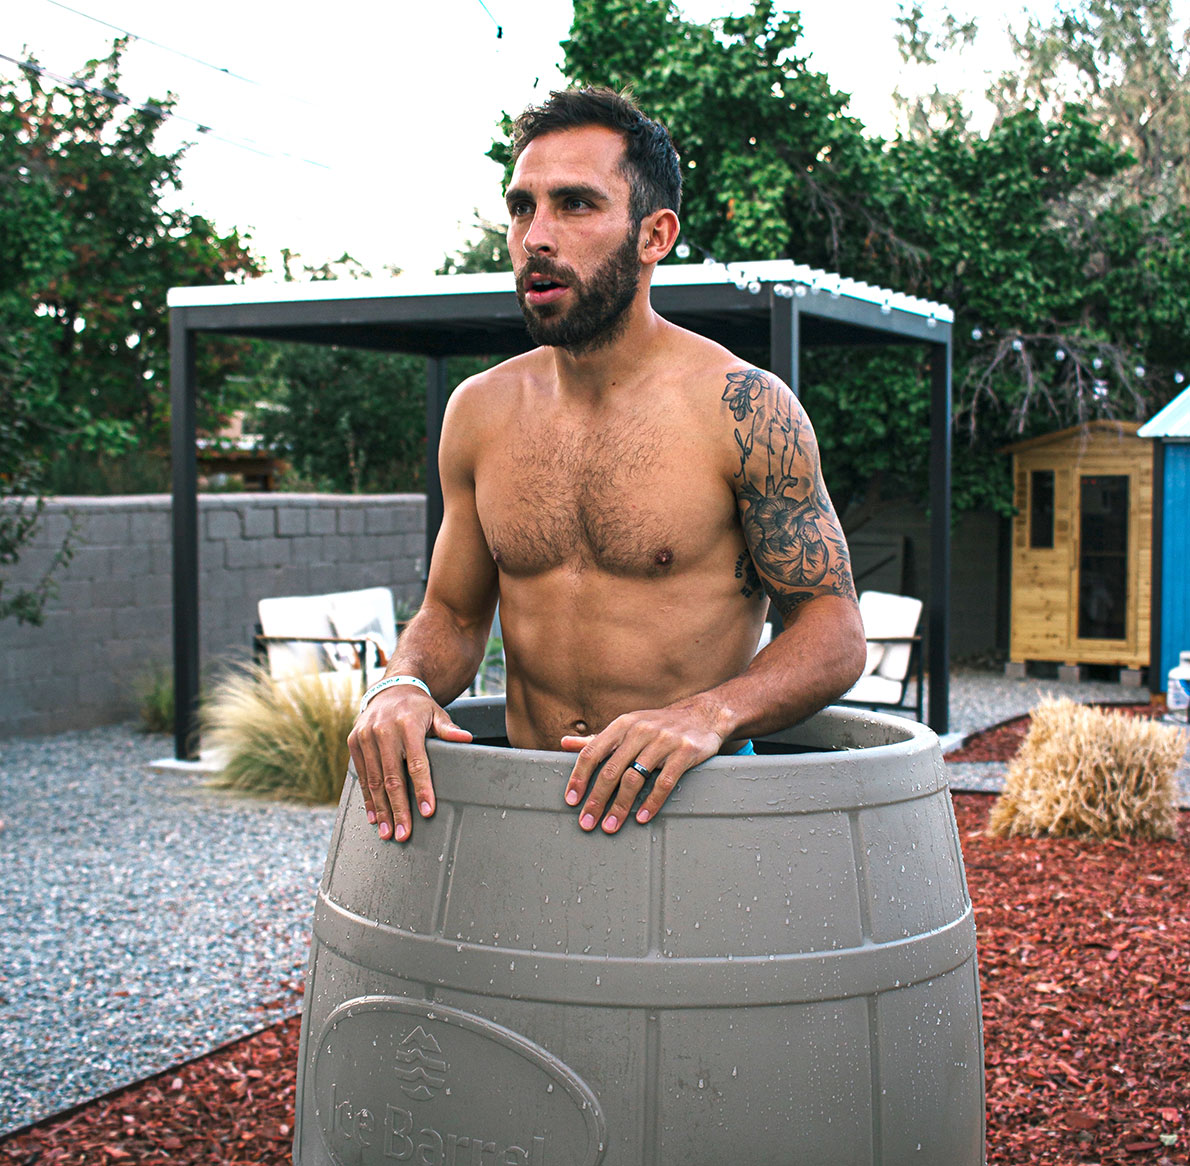 Ice Barrel Cold Water Therapy